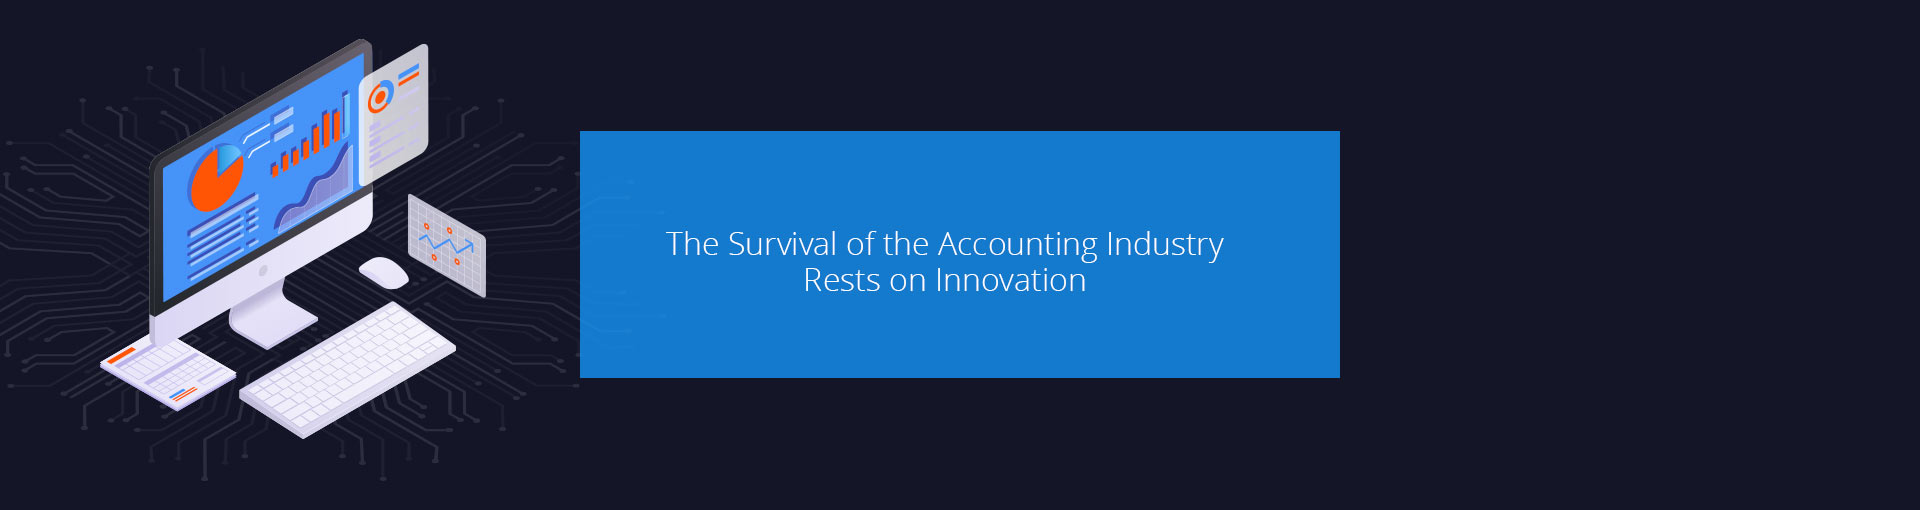 The Survival of the Accounting Industry Rests on Innovation Featured Image